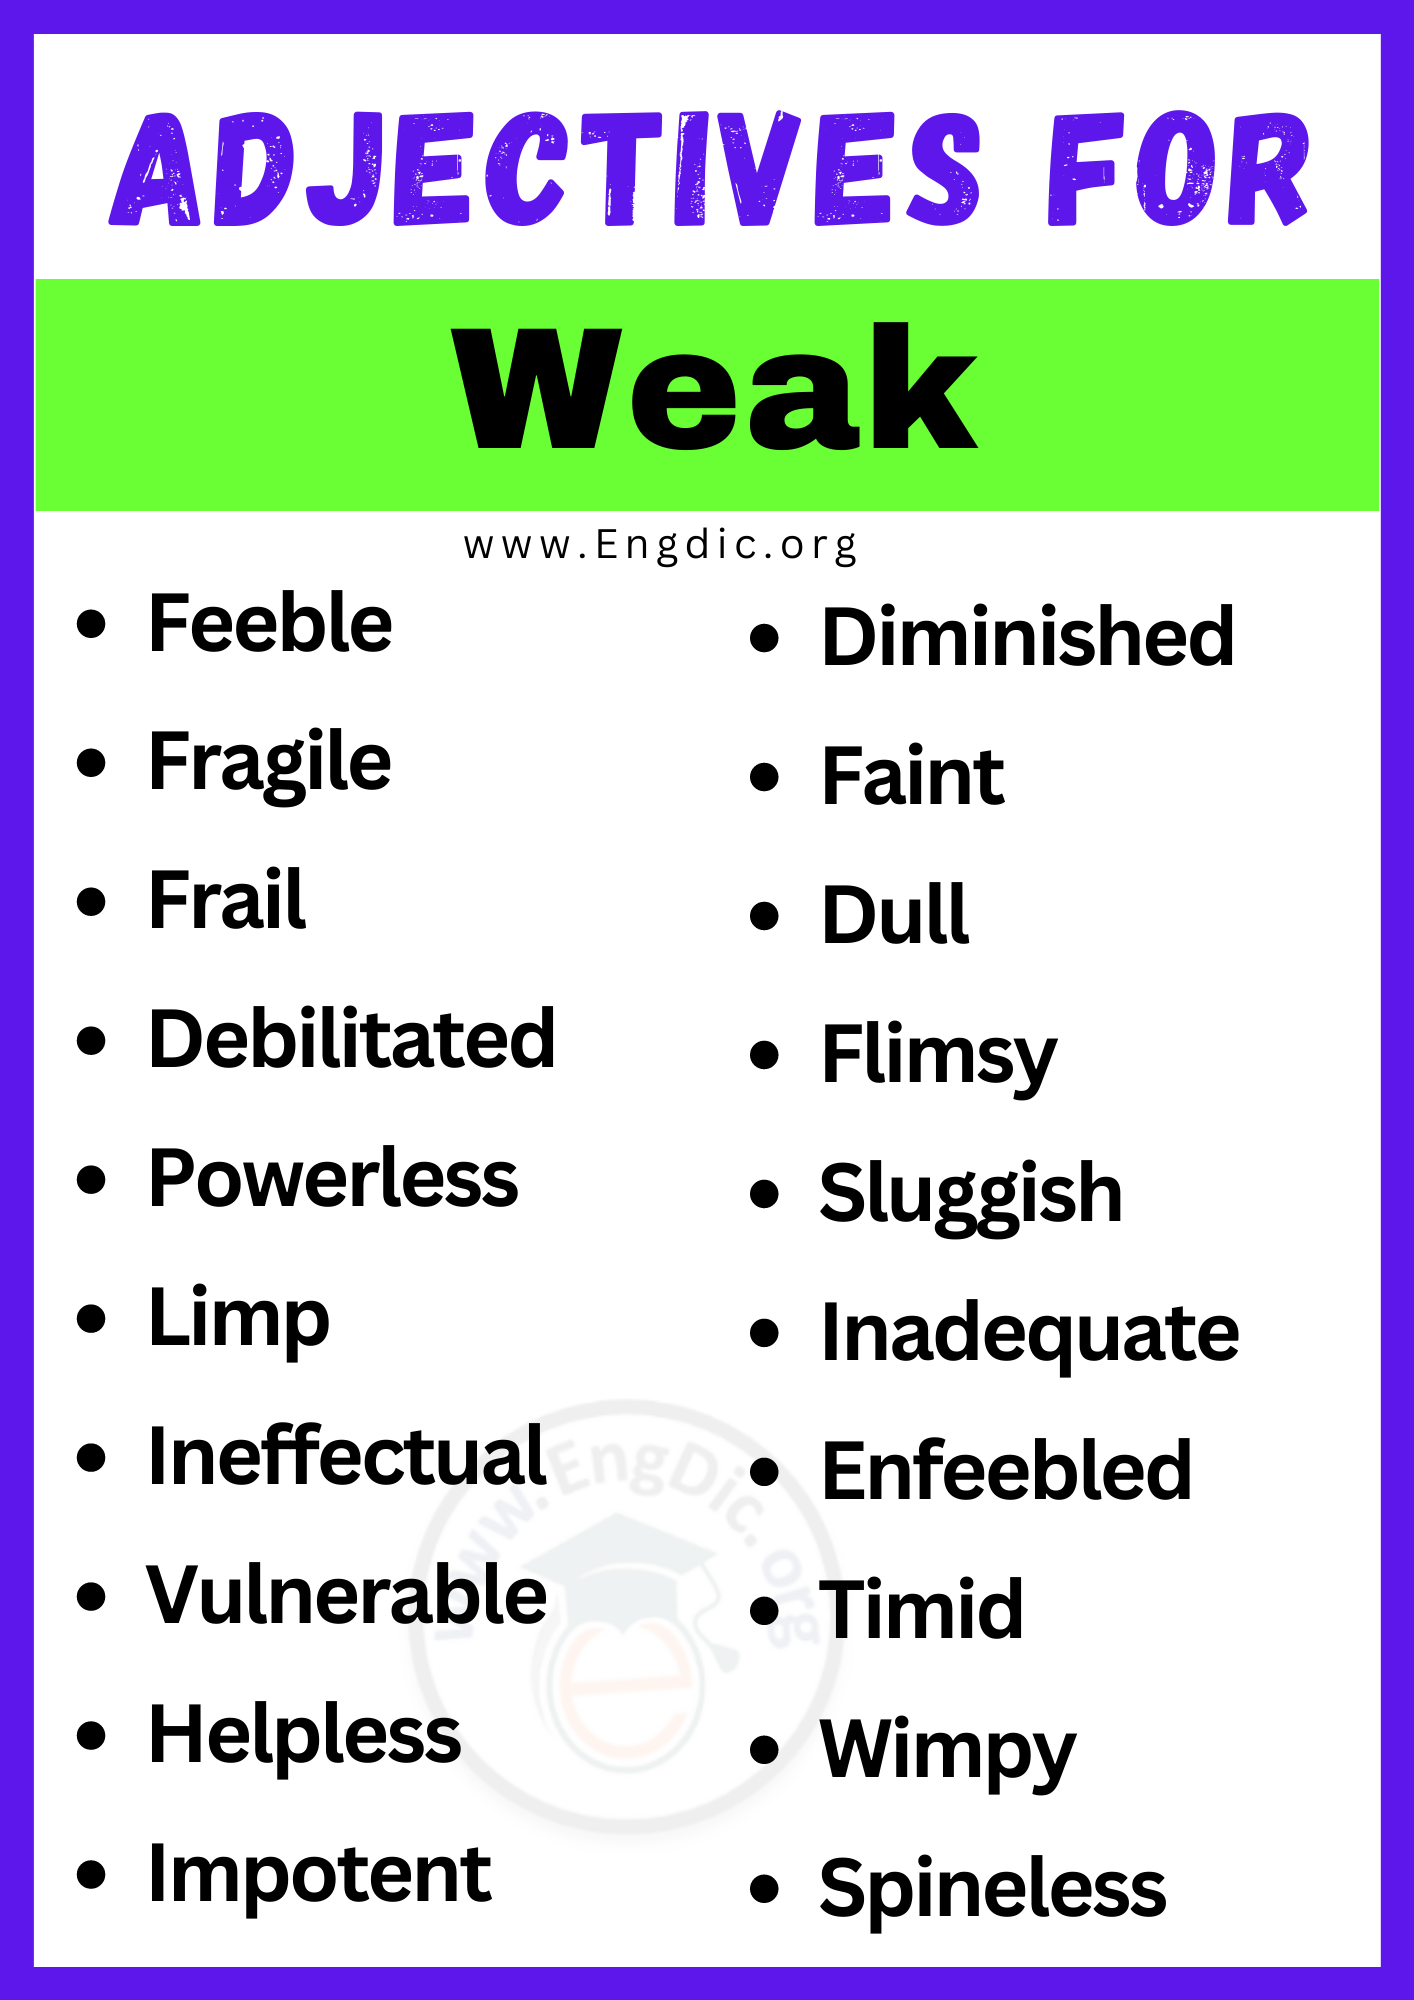 Adjectives for Weak